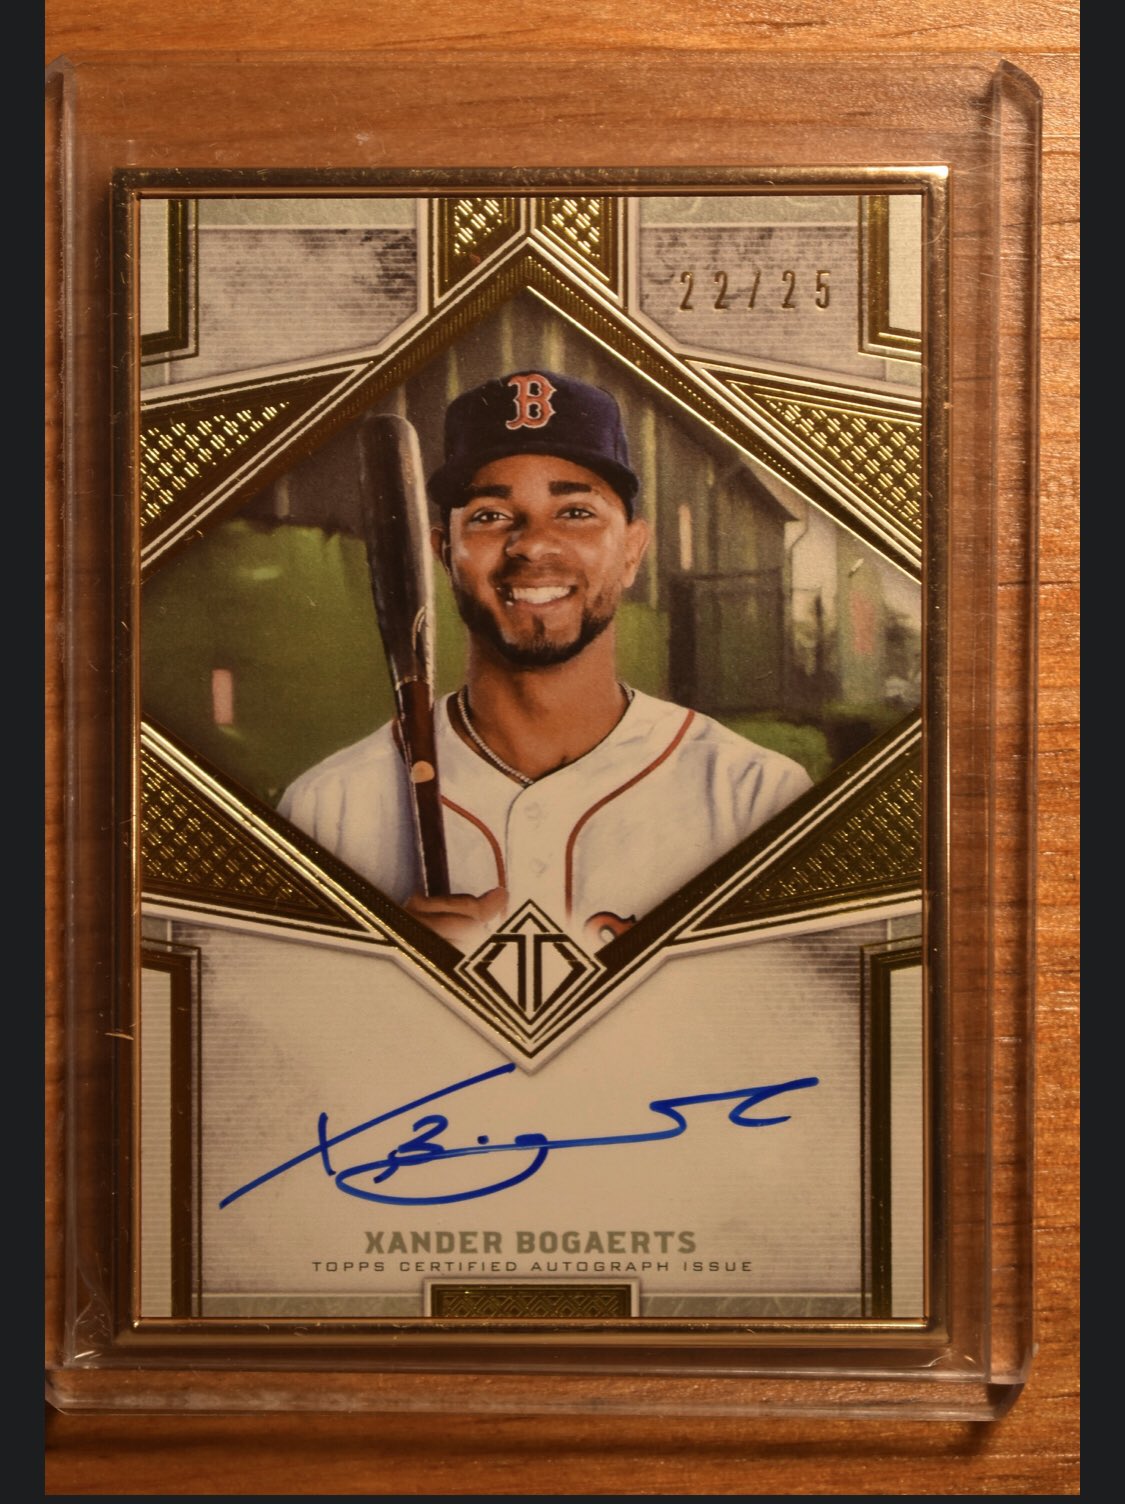 Chris Cotillo on X: Item: Xander Bogaerts autograph /25 Donor: @ryanraplee  Opening bid: $50 Bidding ends: Midnight ET Charity: ARW, Williamsport PA  ( Reply to this tweet with bids. Highest bidder will